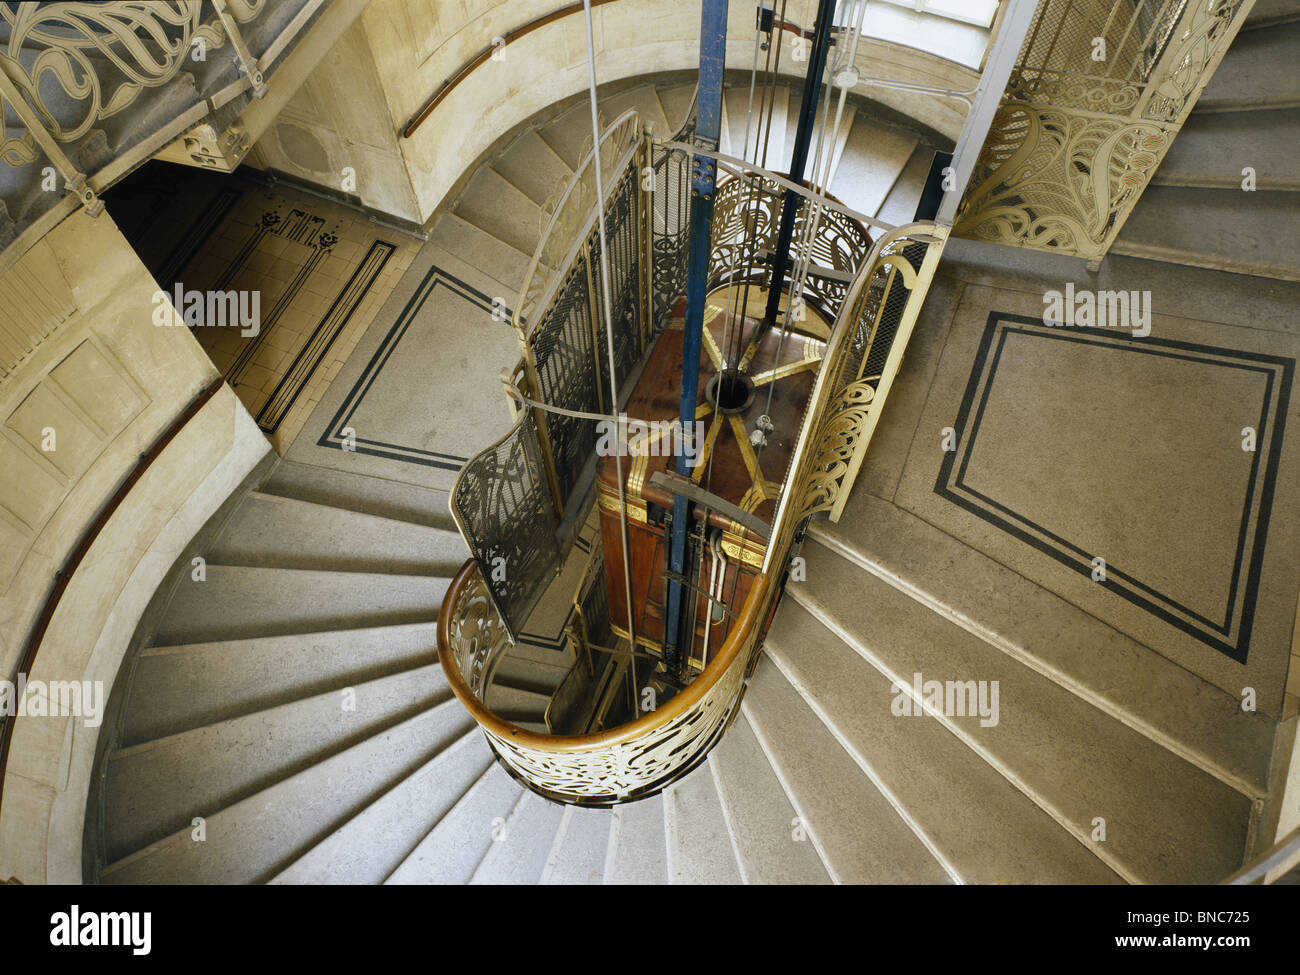 The Majolika Haus, Vienna. Apartment block 1898 by Otto Wagner.  Stairwell and elevator shaft. Art nouveau Jugendstil Secession Stock Photo